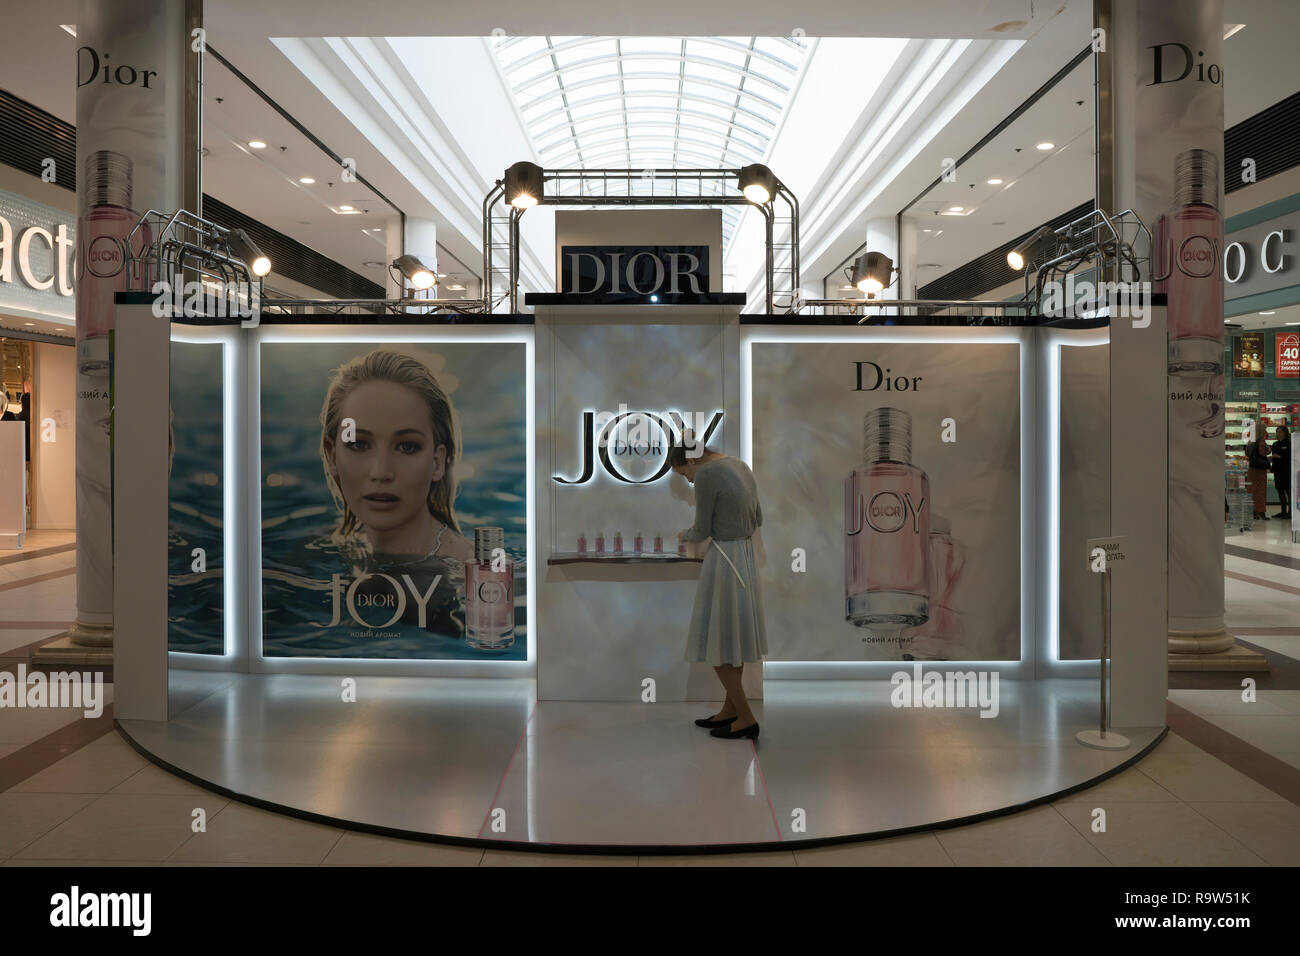 Advertising campaign for the new fragrance 'Joy' from Christian Dior in a shopping mall in the city center of Kiev, Ukraine. Stock Photo